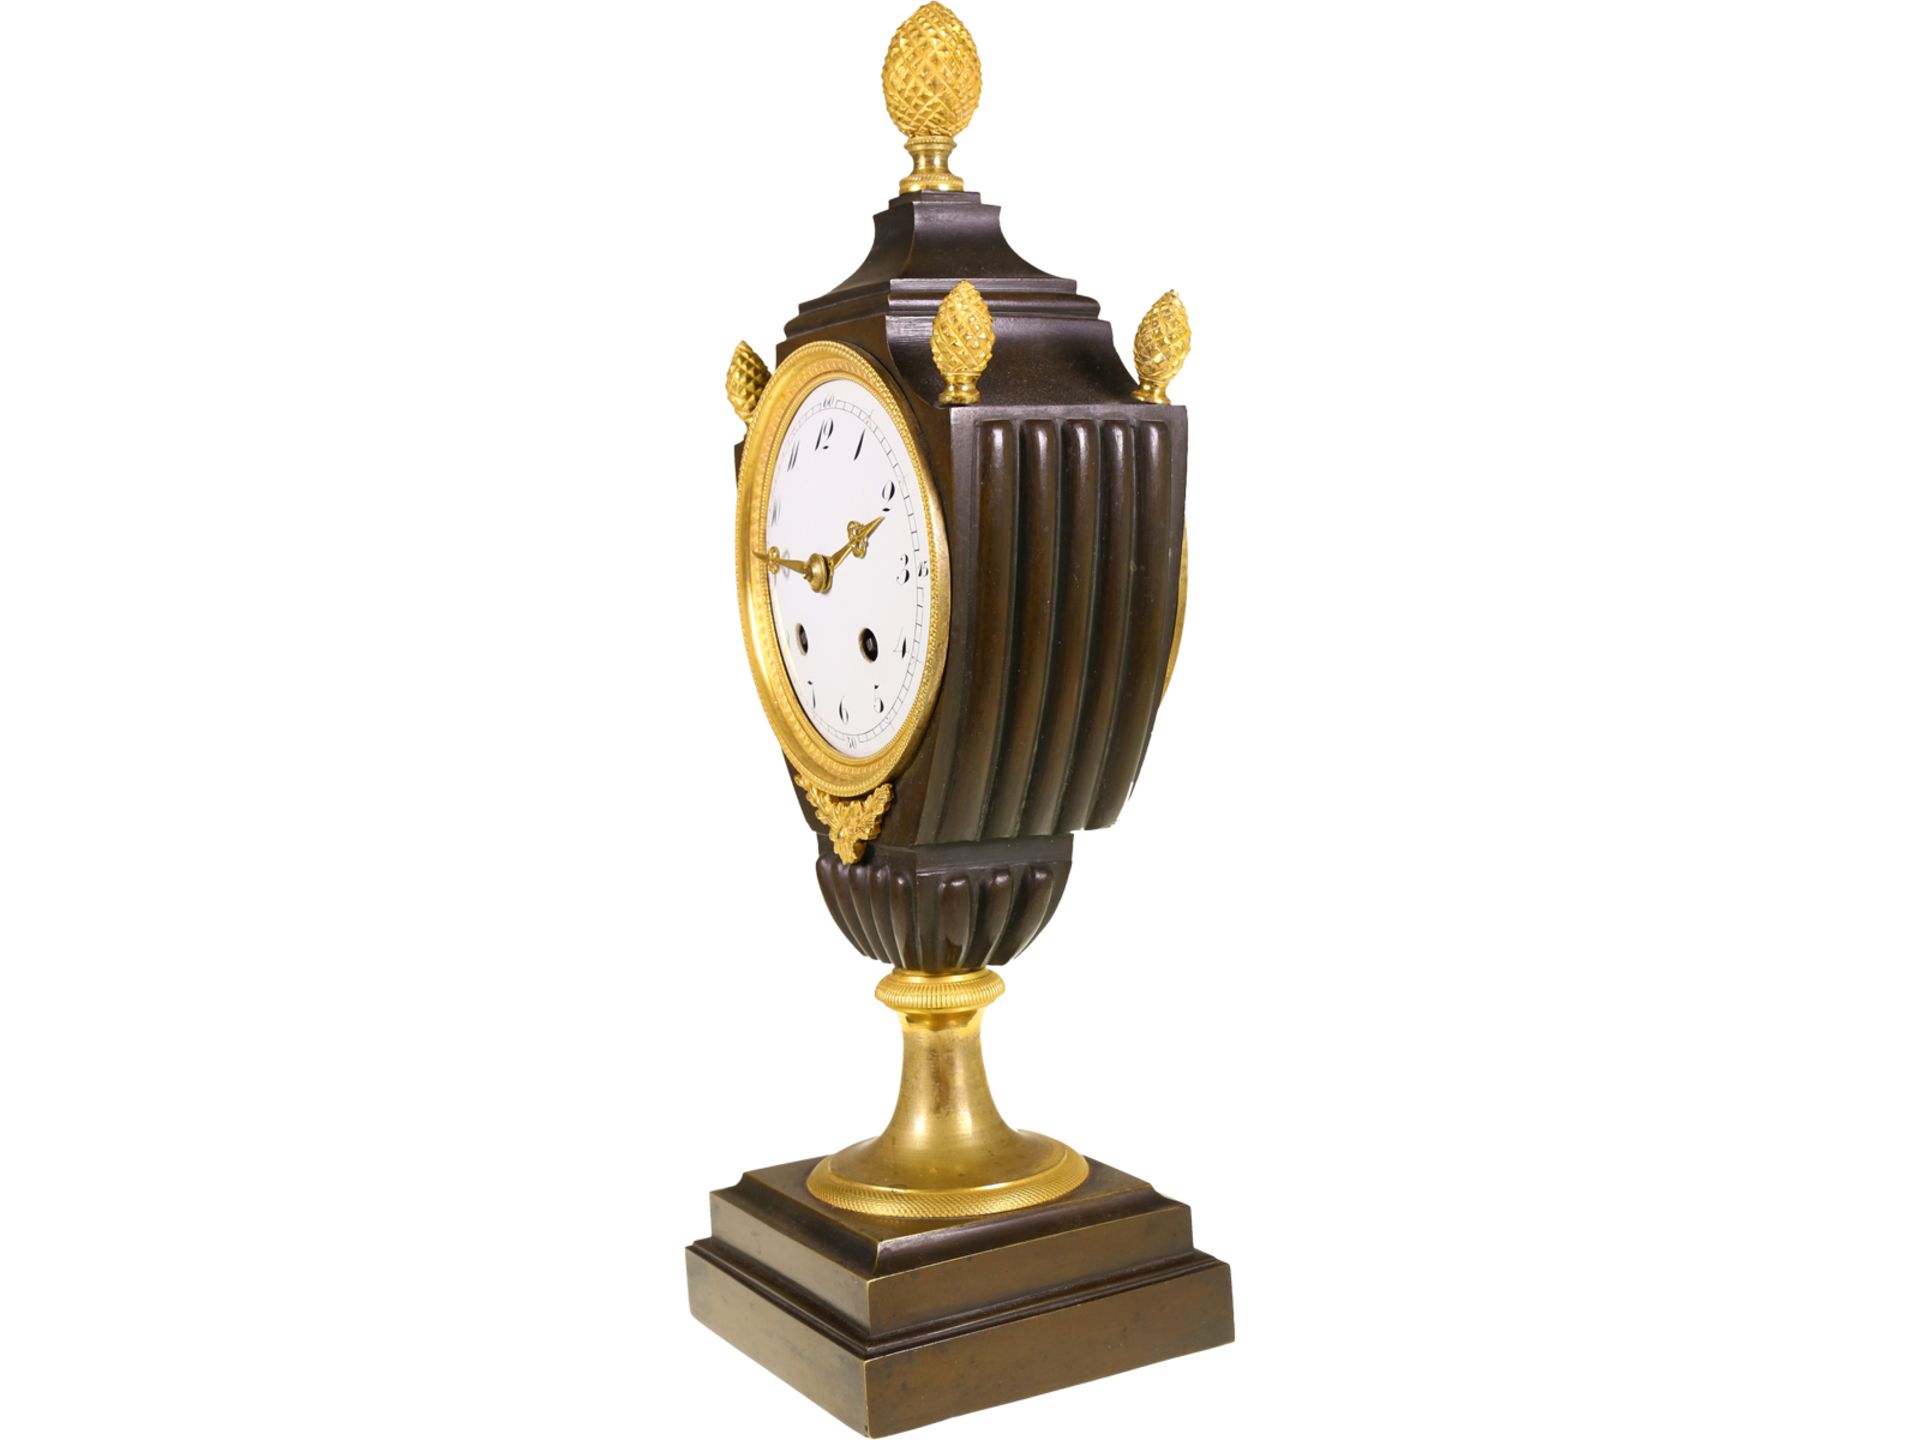 Table clock: Directoire clock in the shape of an "Urn", bronze, around 1790 - Image 2 of 3